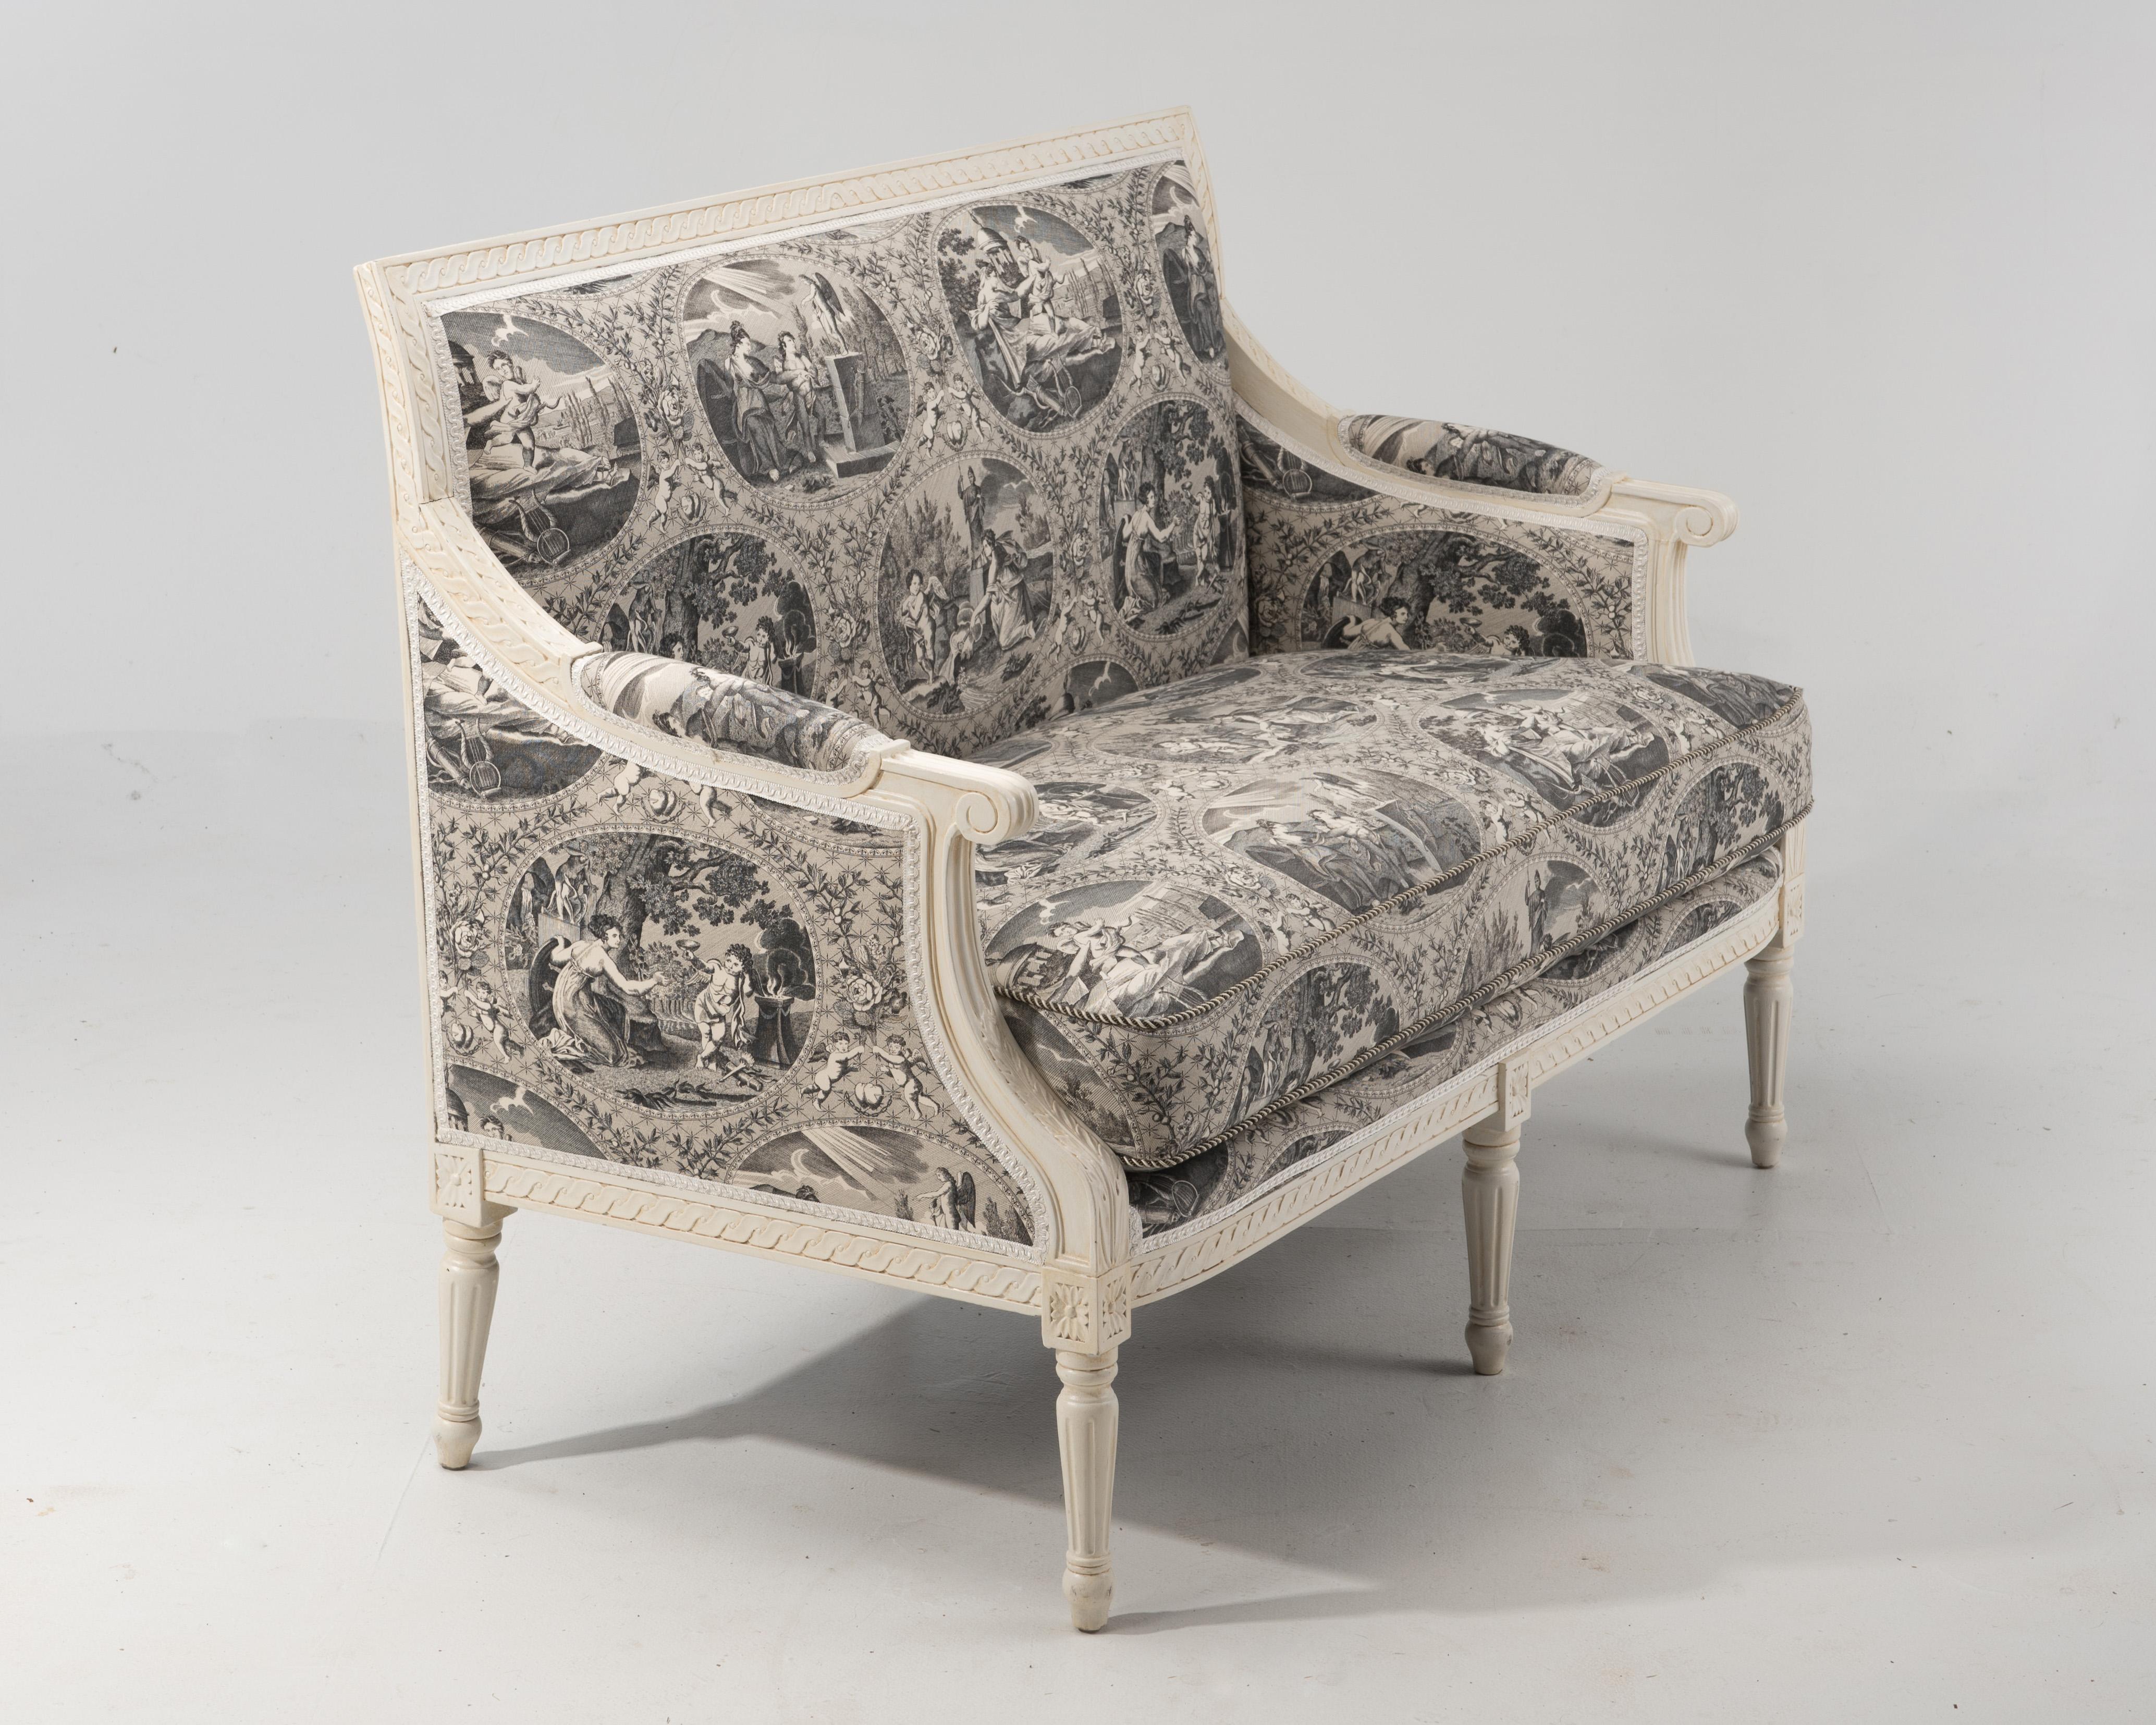 Lovely loveseat elegantly carved and painted cream in the Louis XVI style, recently upholstered in black and white toile, with a comfy down removable seat cushion.
Measures: Seat height 19
Seat depth 21
Arm height 26.5.